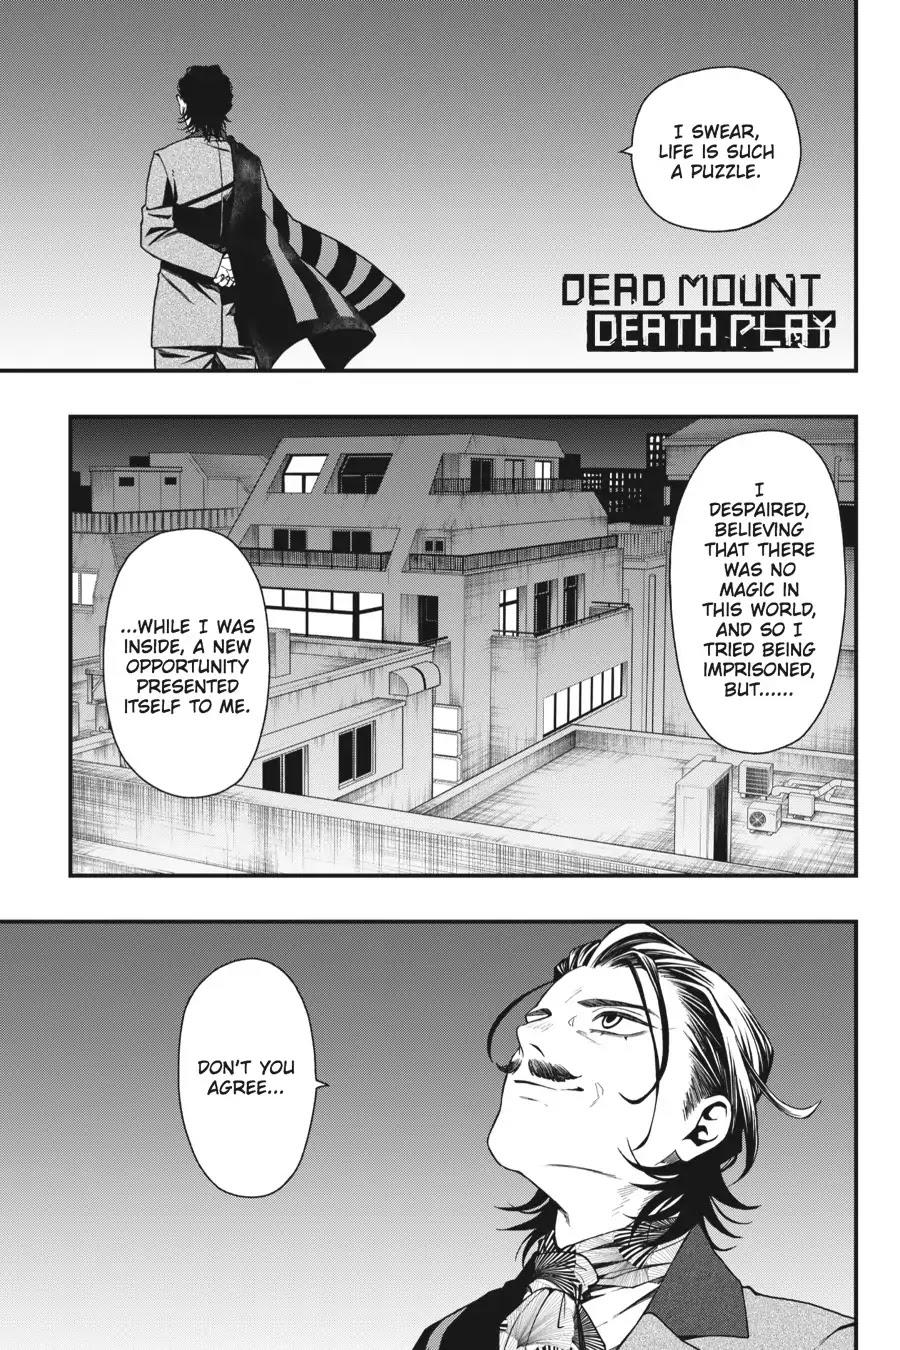 So I Tried Dead Mount Death Play Manga and 